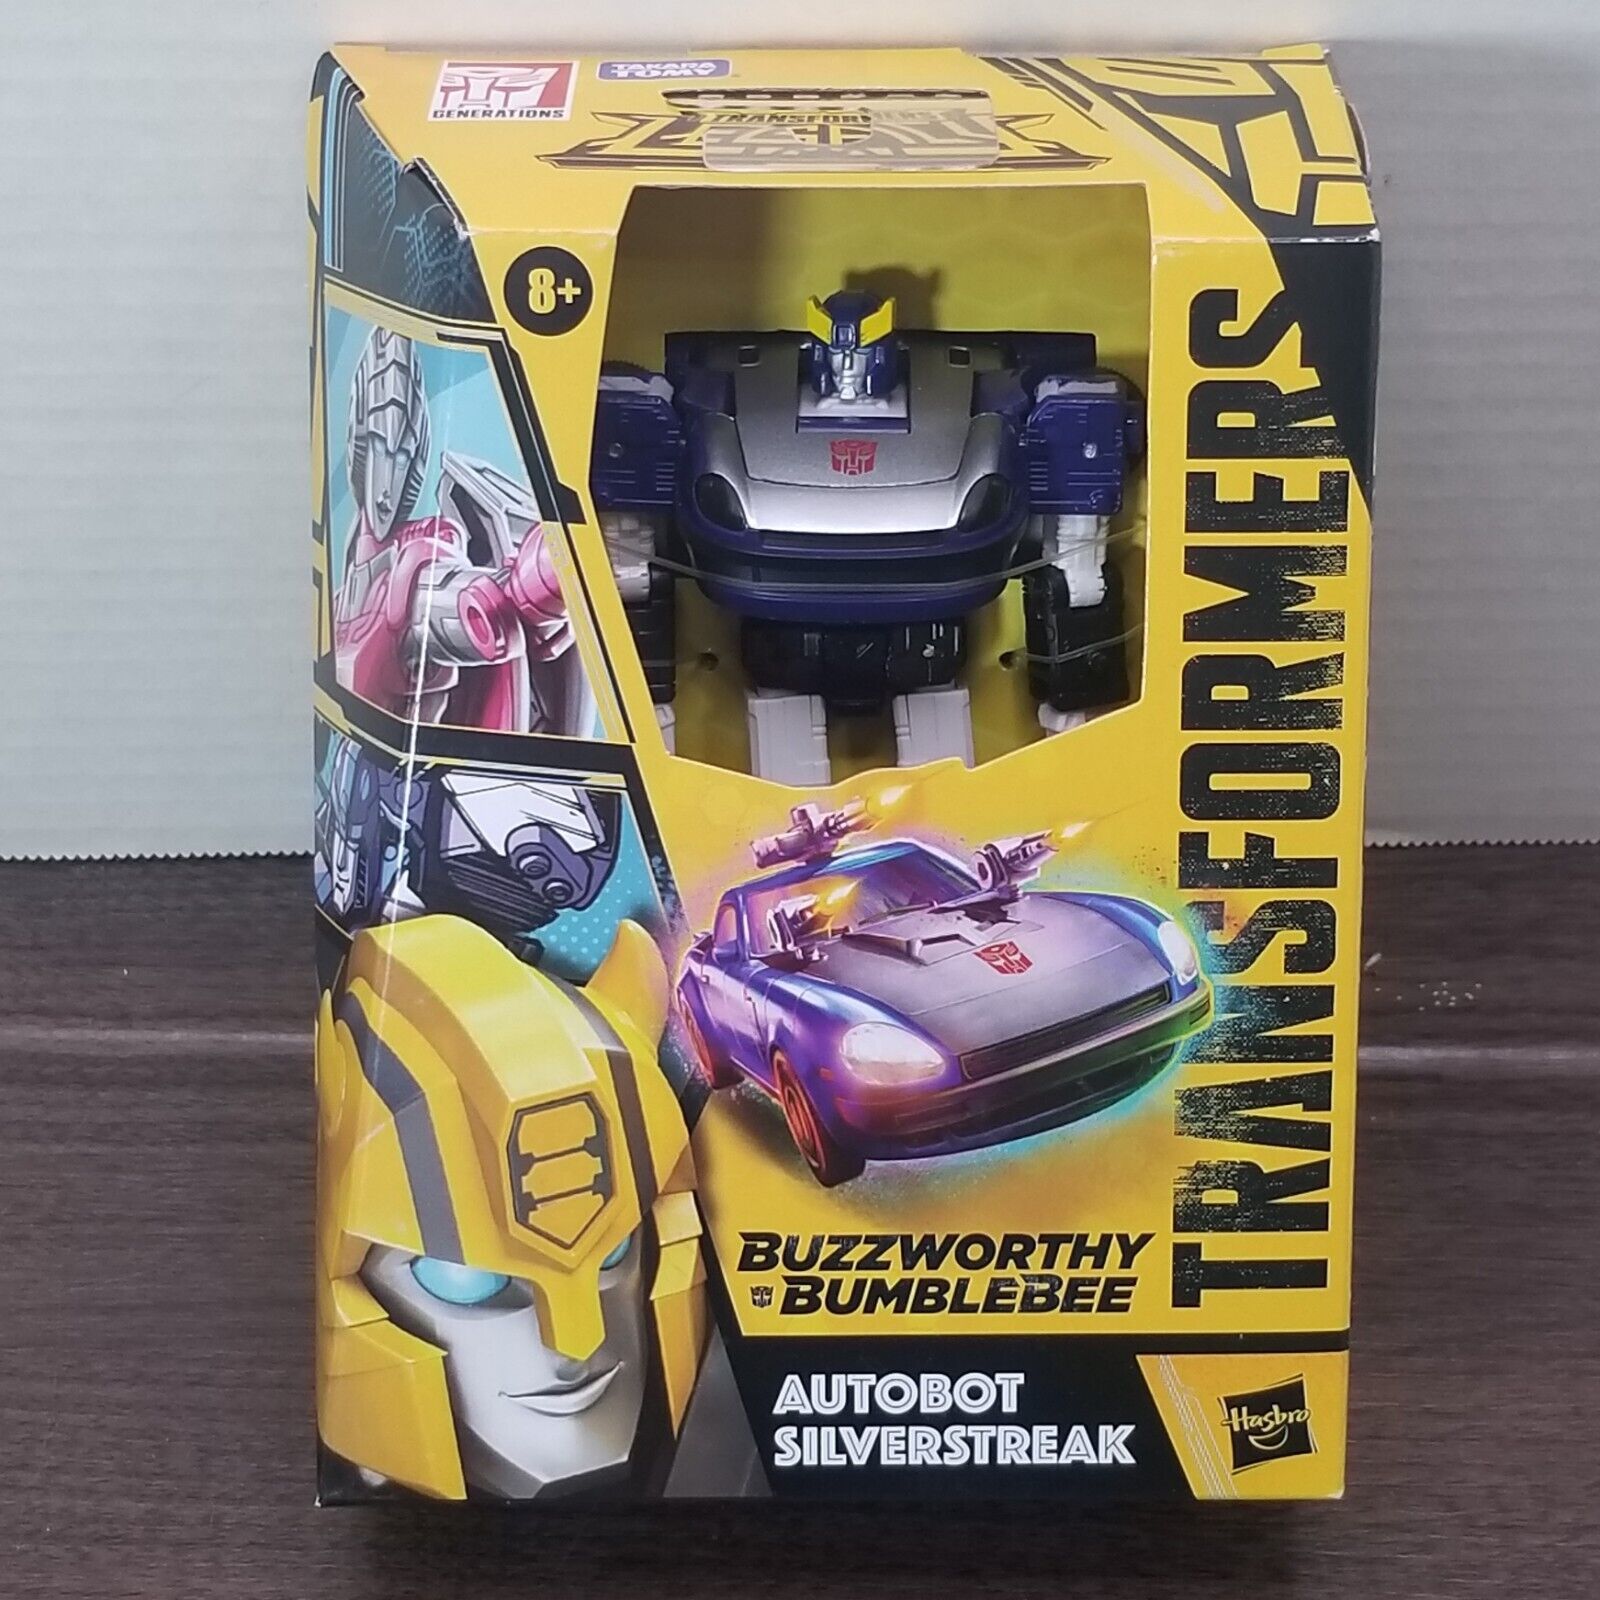 Primary image for Transformers Generations Legacy Buzzworthy Bumblebee | AutoBot SilverStreak